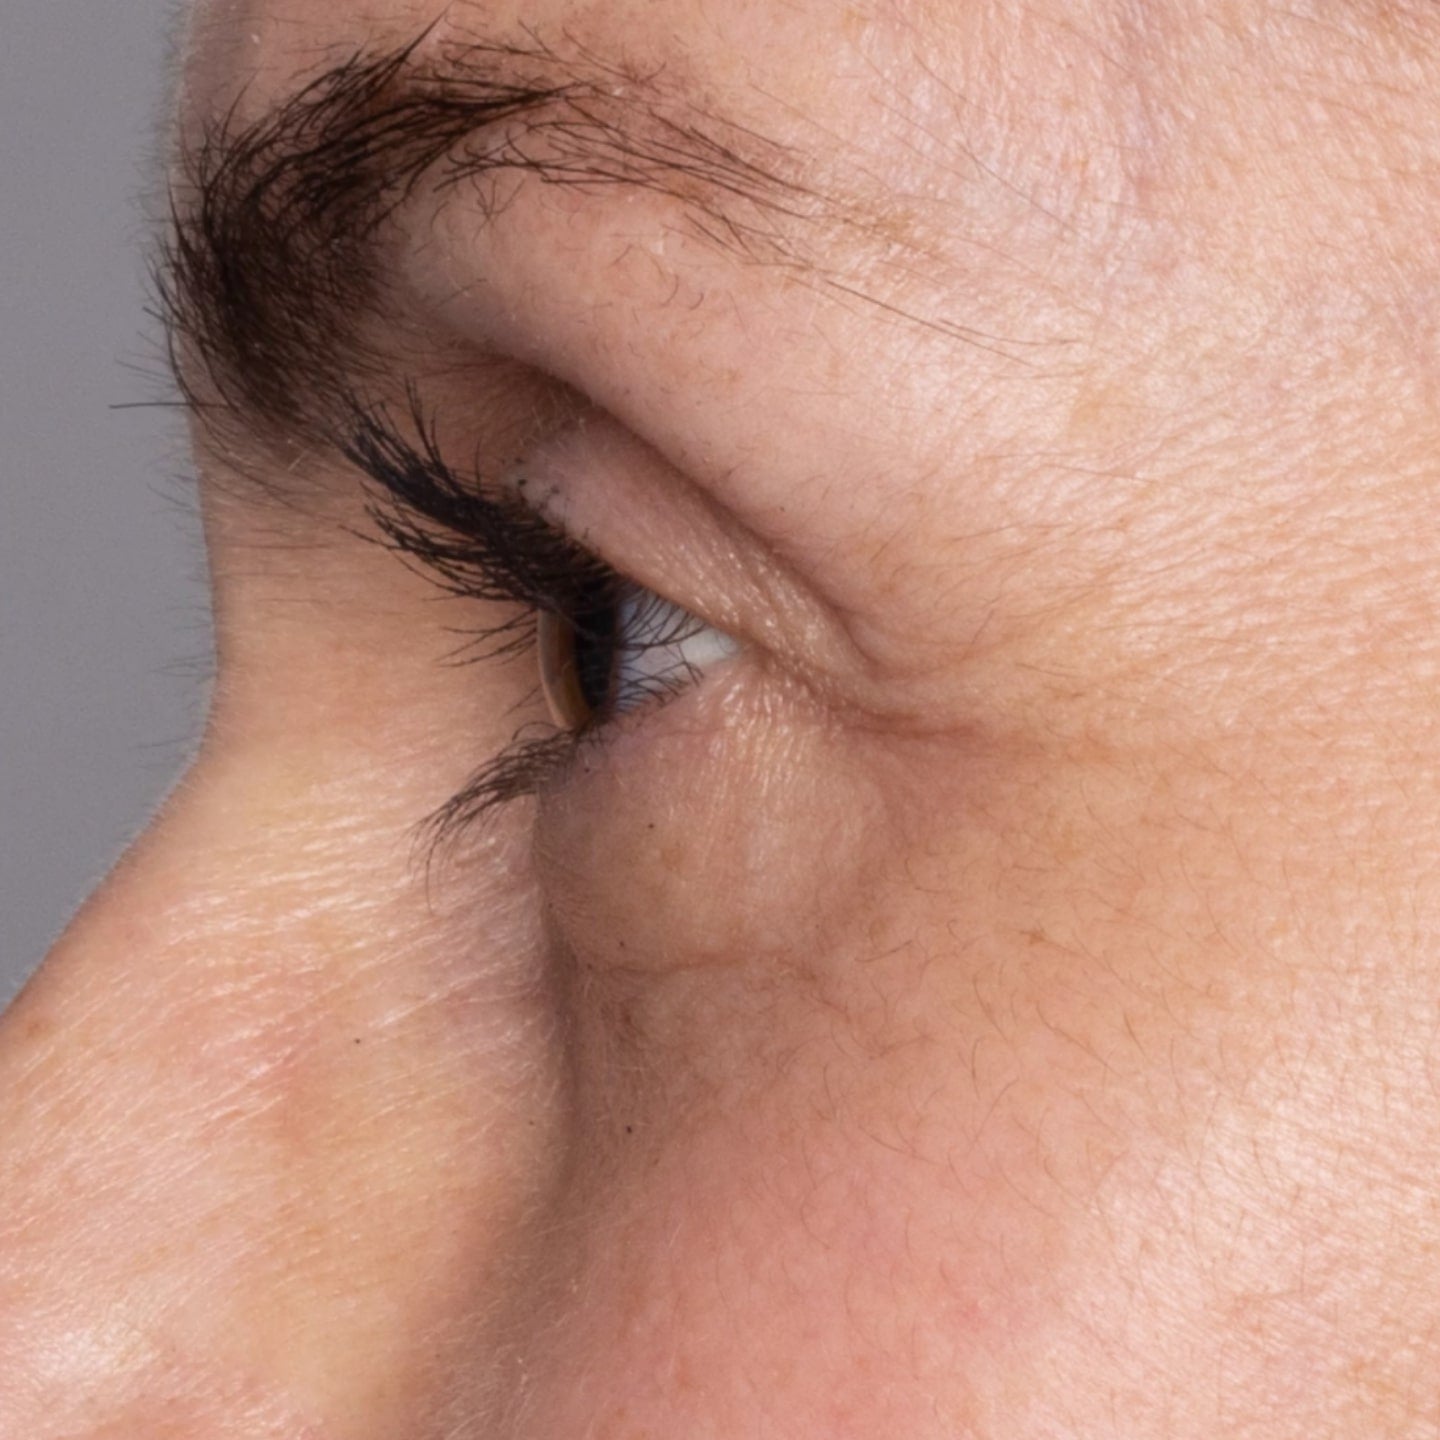 Close up photo of the side profile of a woman's eye